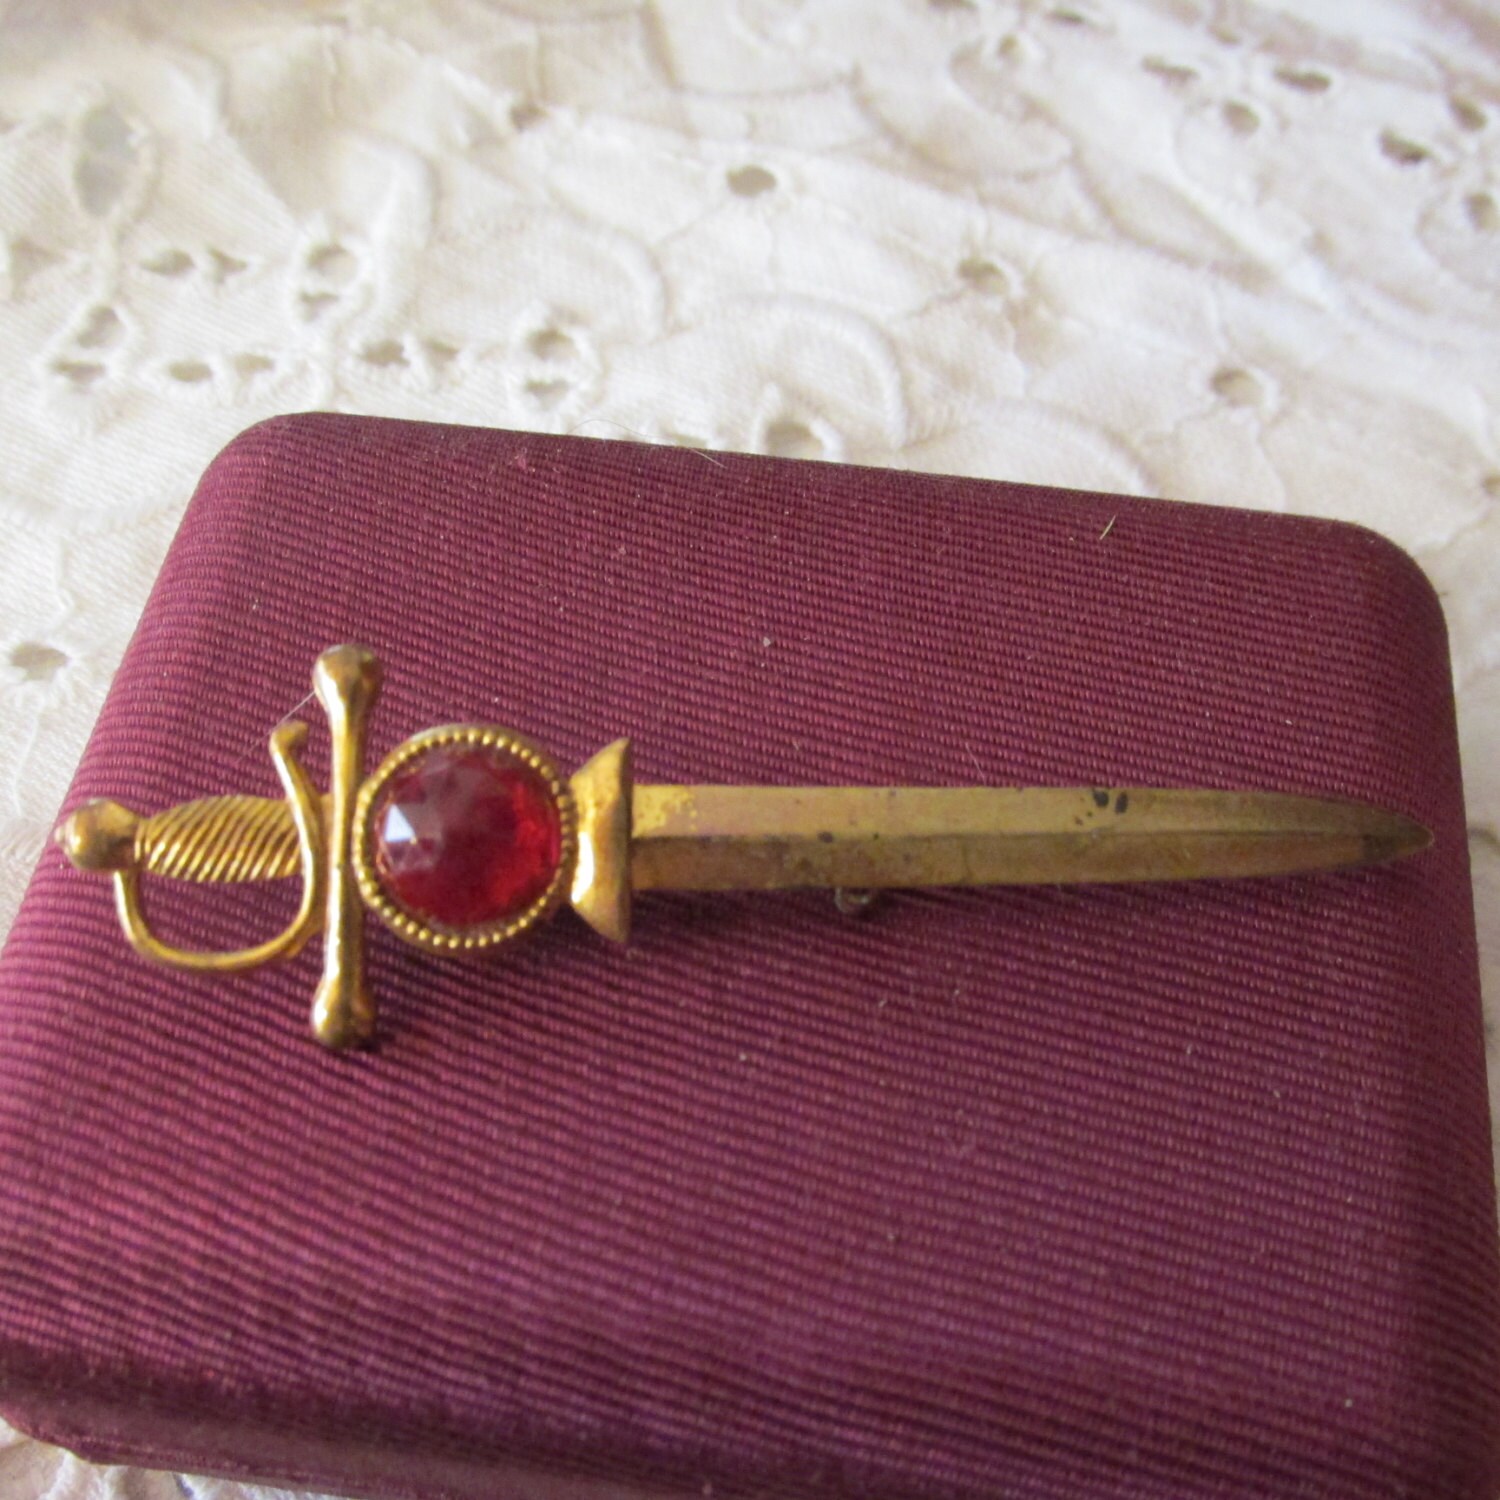 Vintage SWORD TIE PIN with Red Lucite Stone marked Broadcast N